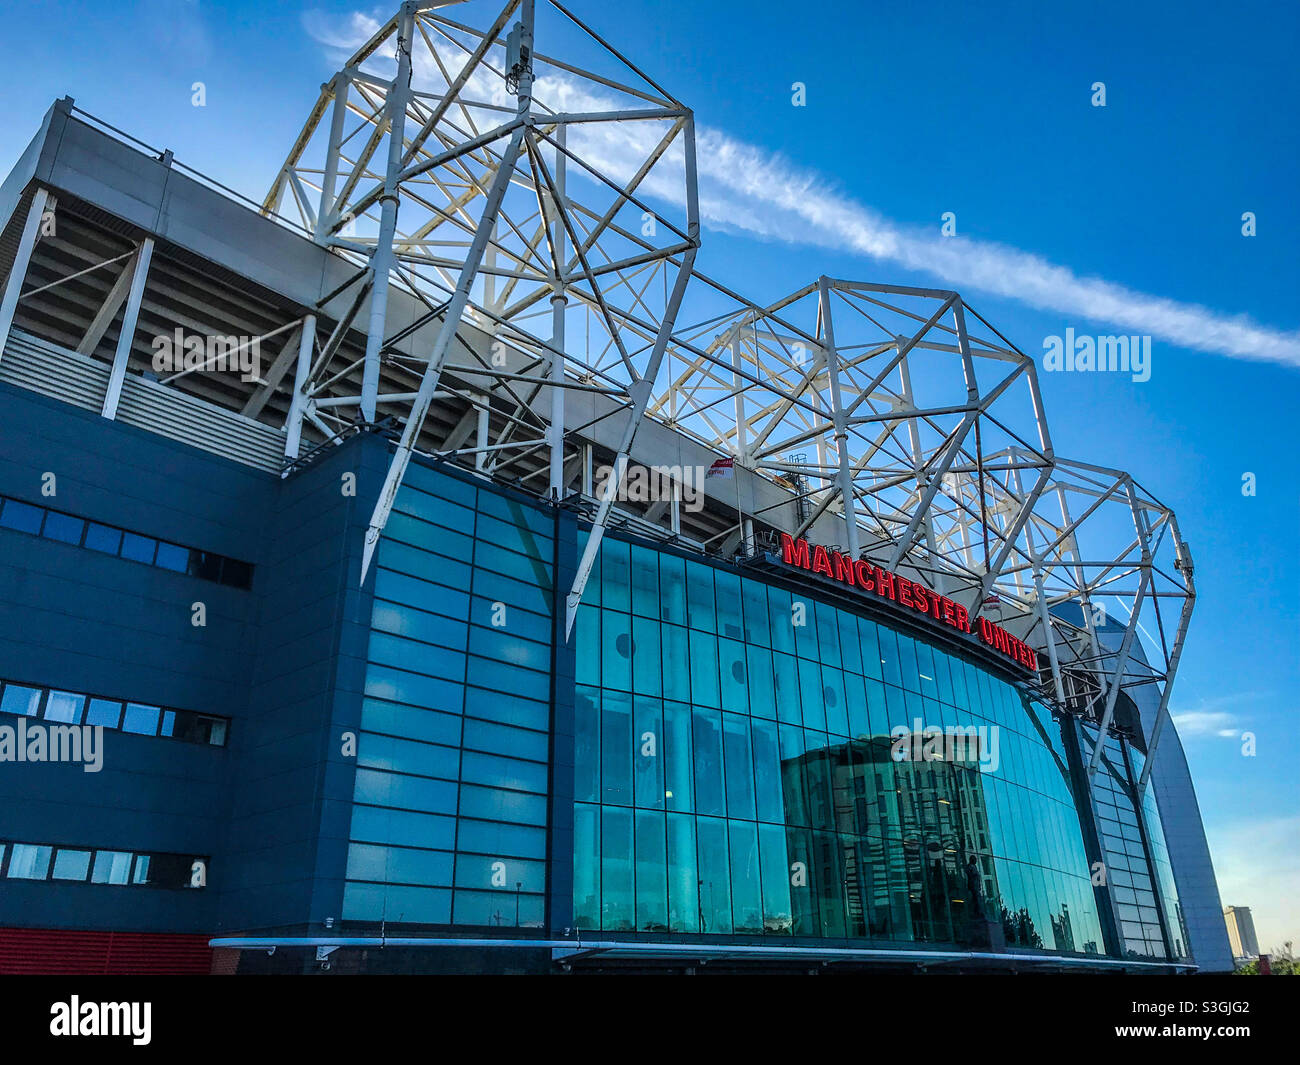 Old Trafford, Manchester United football ground Stock Photo